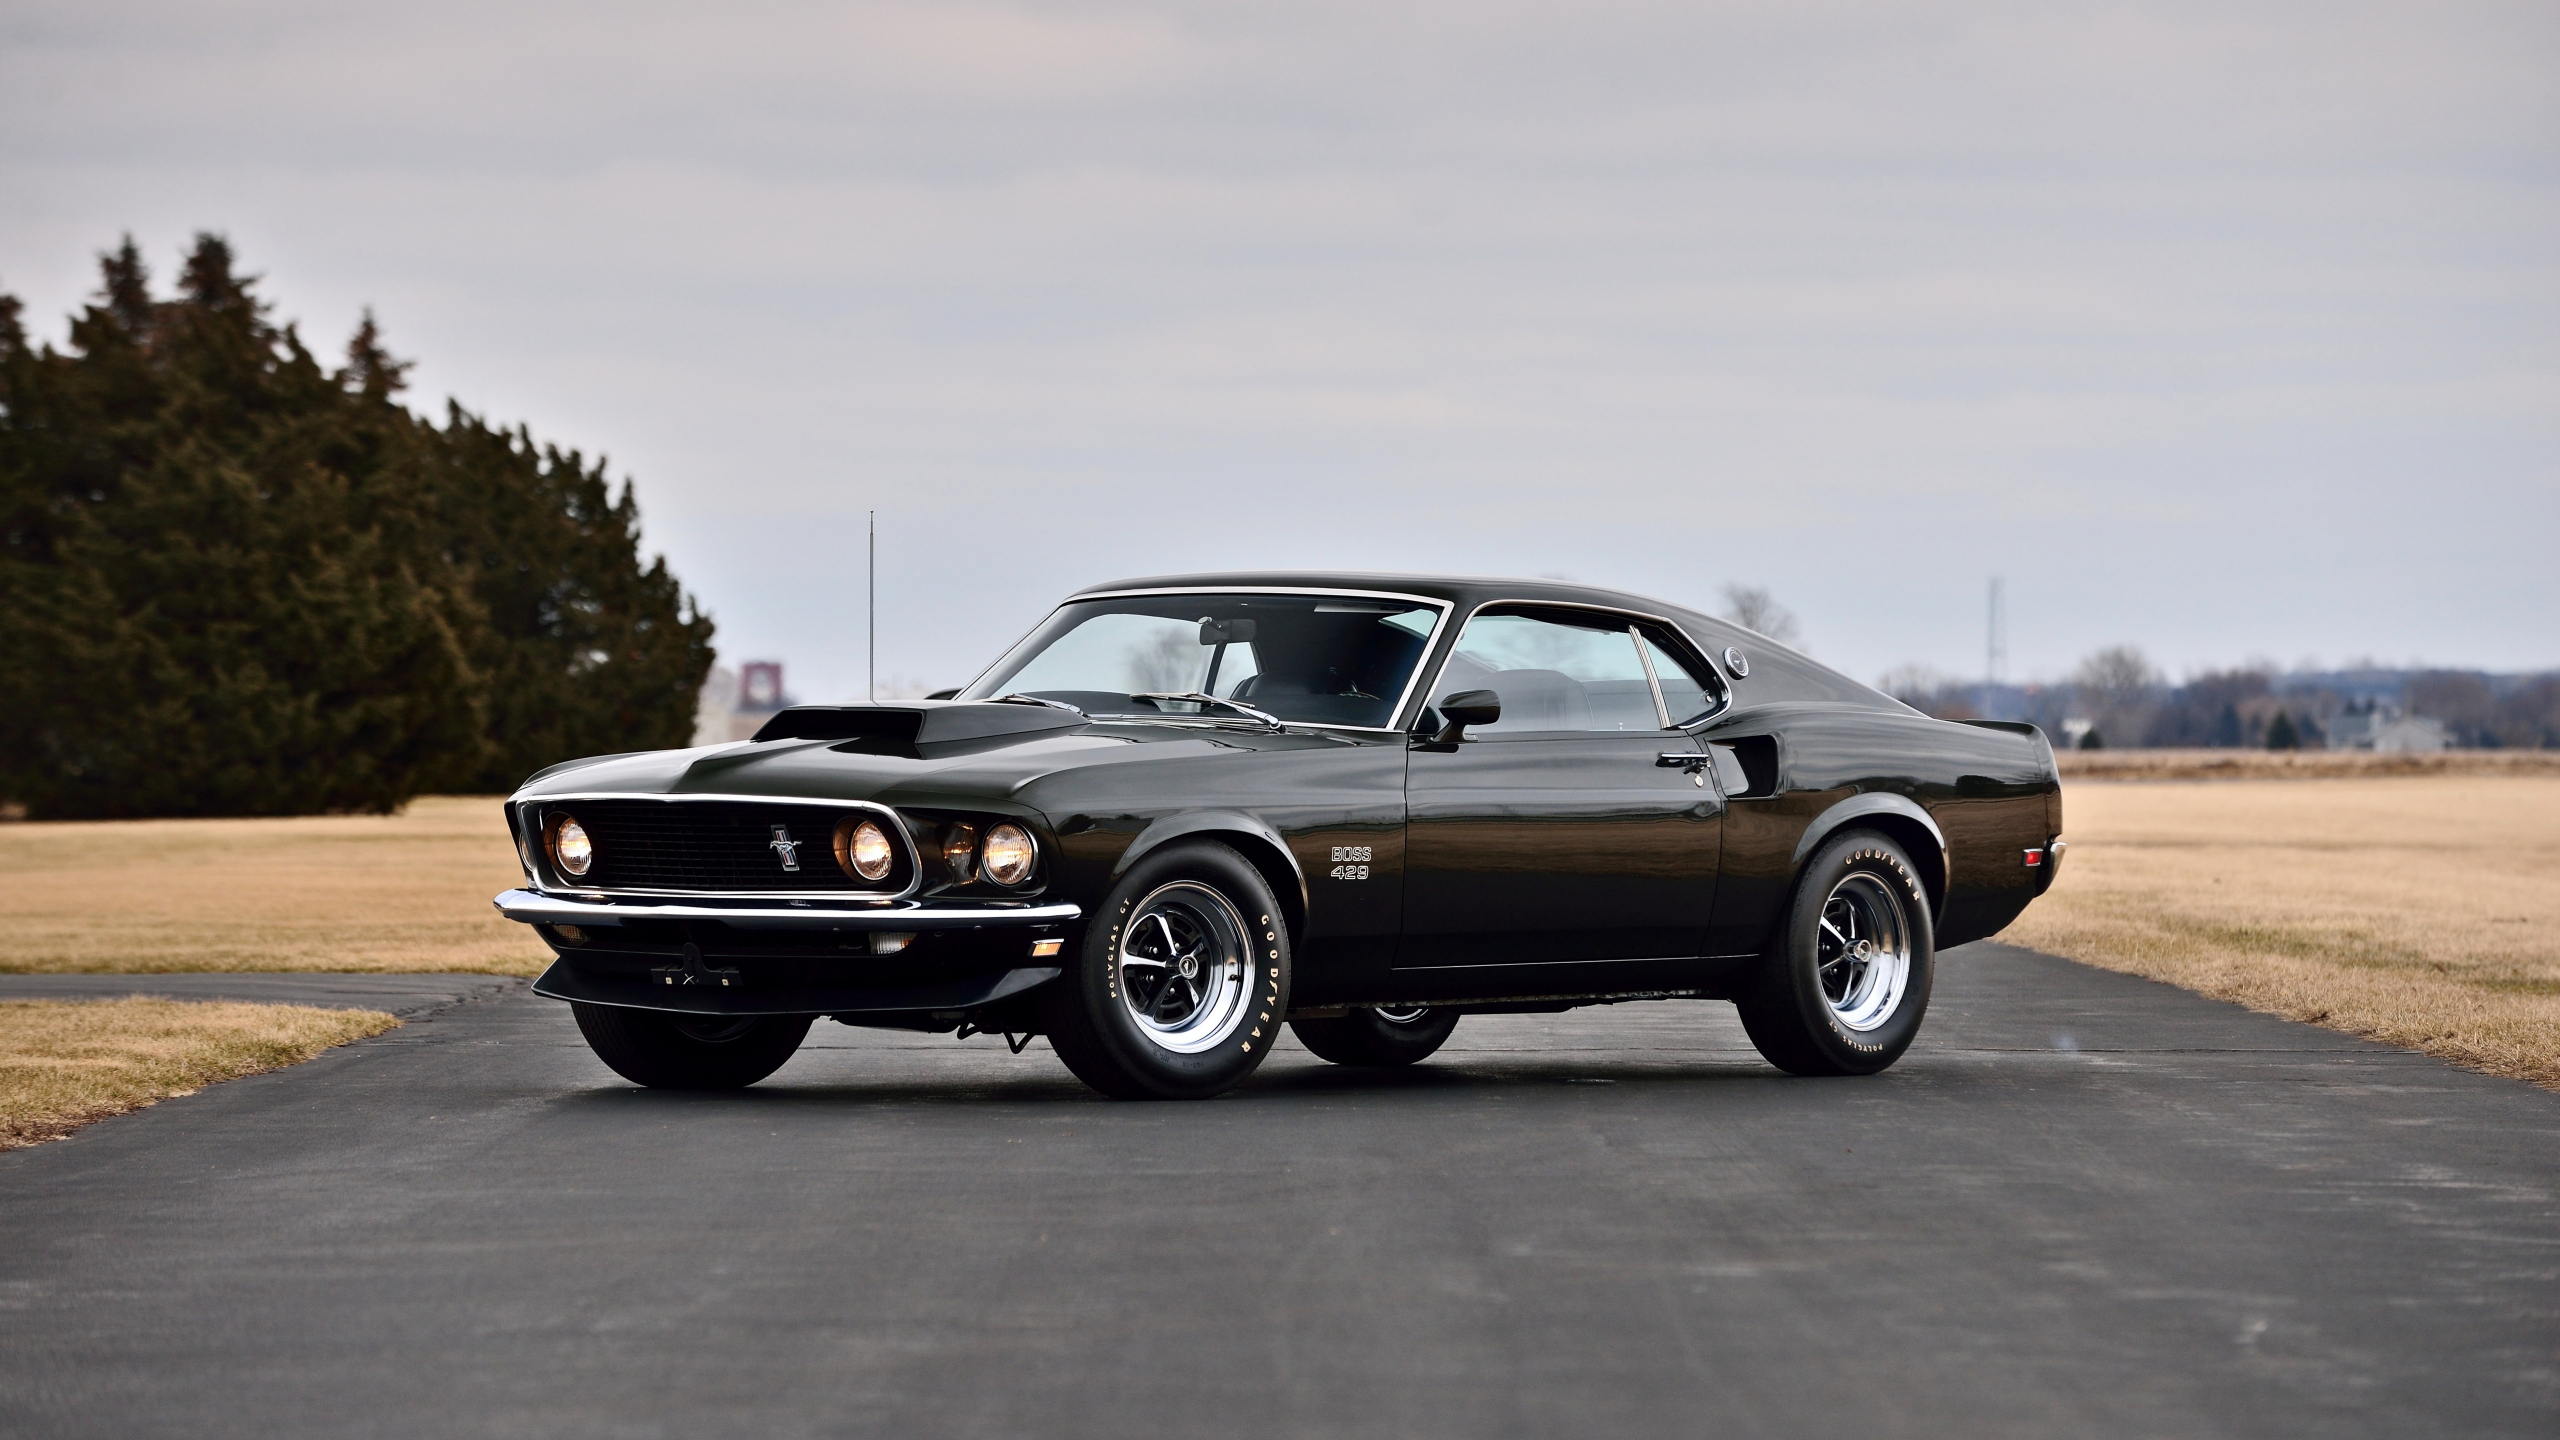 Download classic, black, muscle car, ford mustang boss 429 2560x1440 wallpaper, dual wide 16:9 2560x1440 HD image, background, 8261